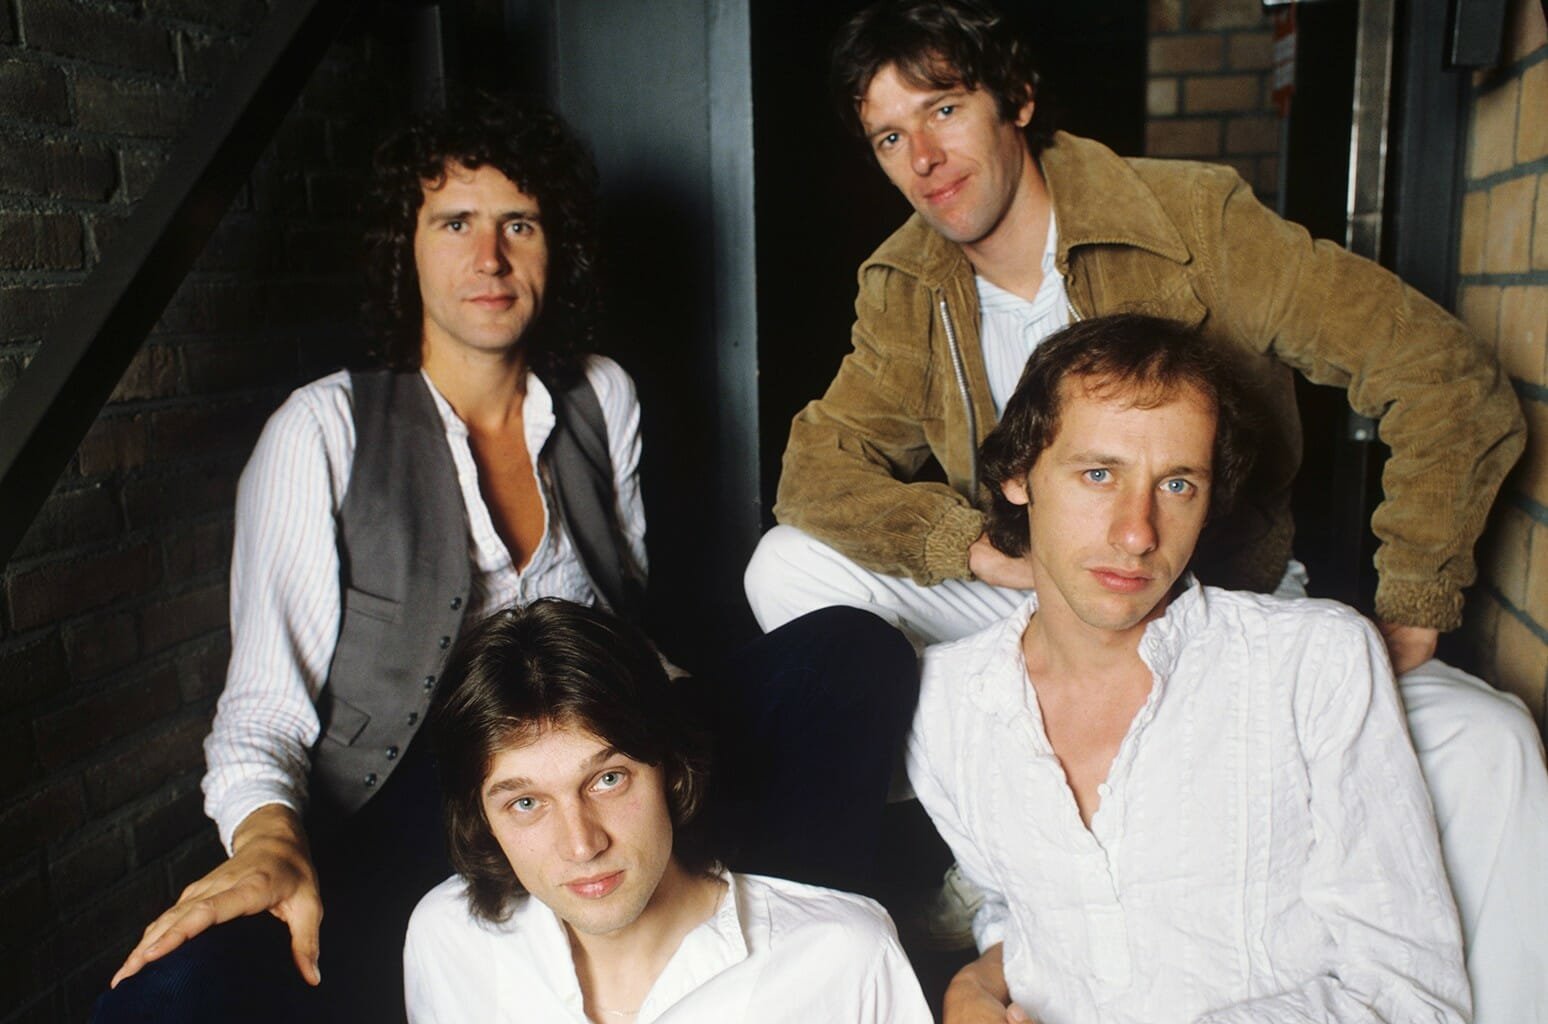 17. "Brother In My Arms" by Dire Straits